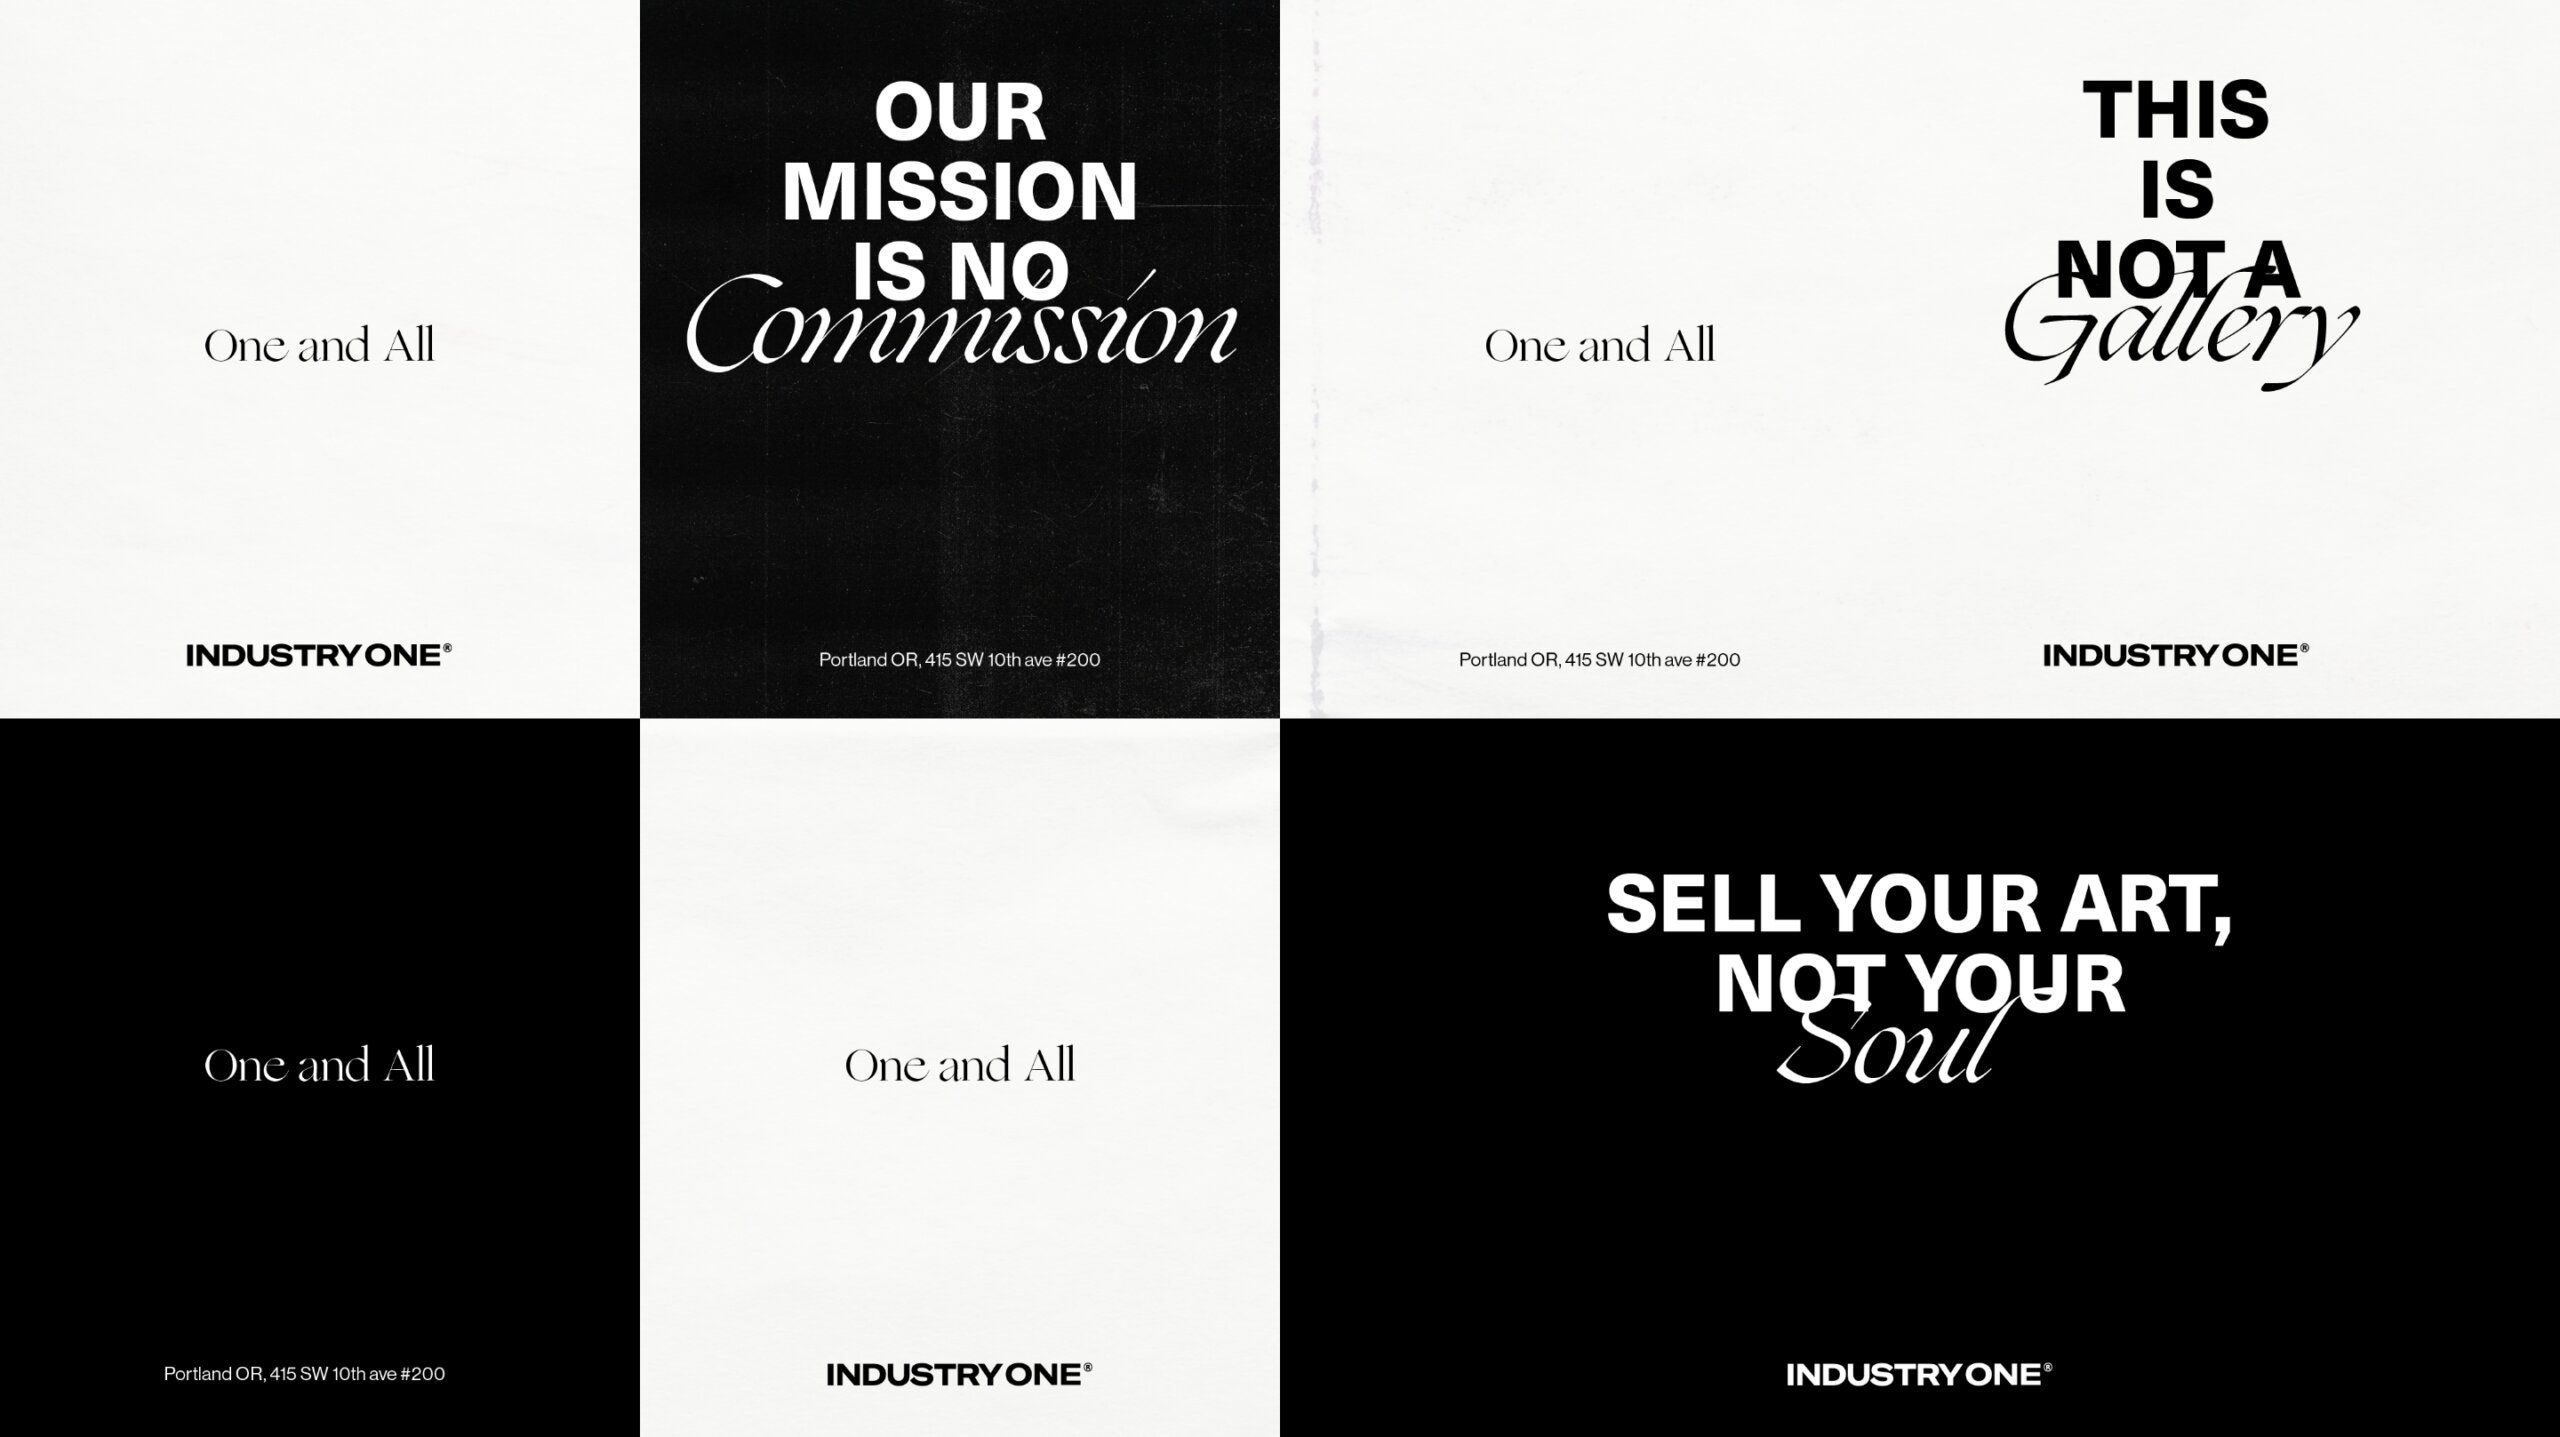 One and all. Our mission is no commission. This is not a gallery. Sell your art not your soul.